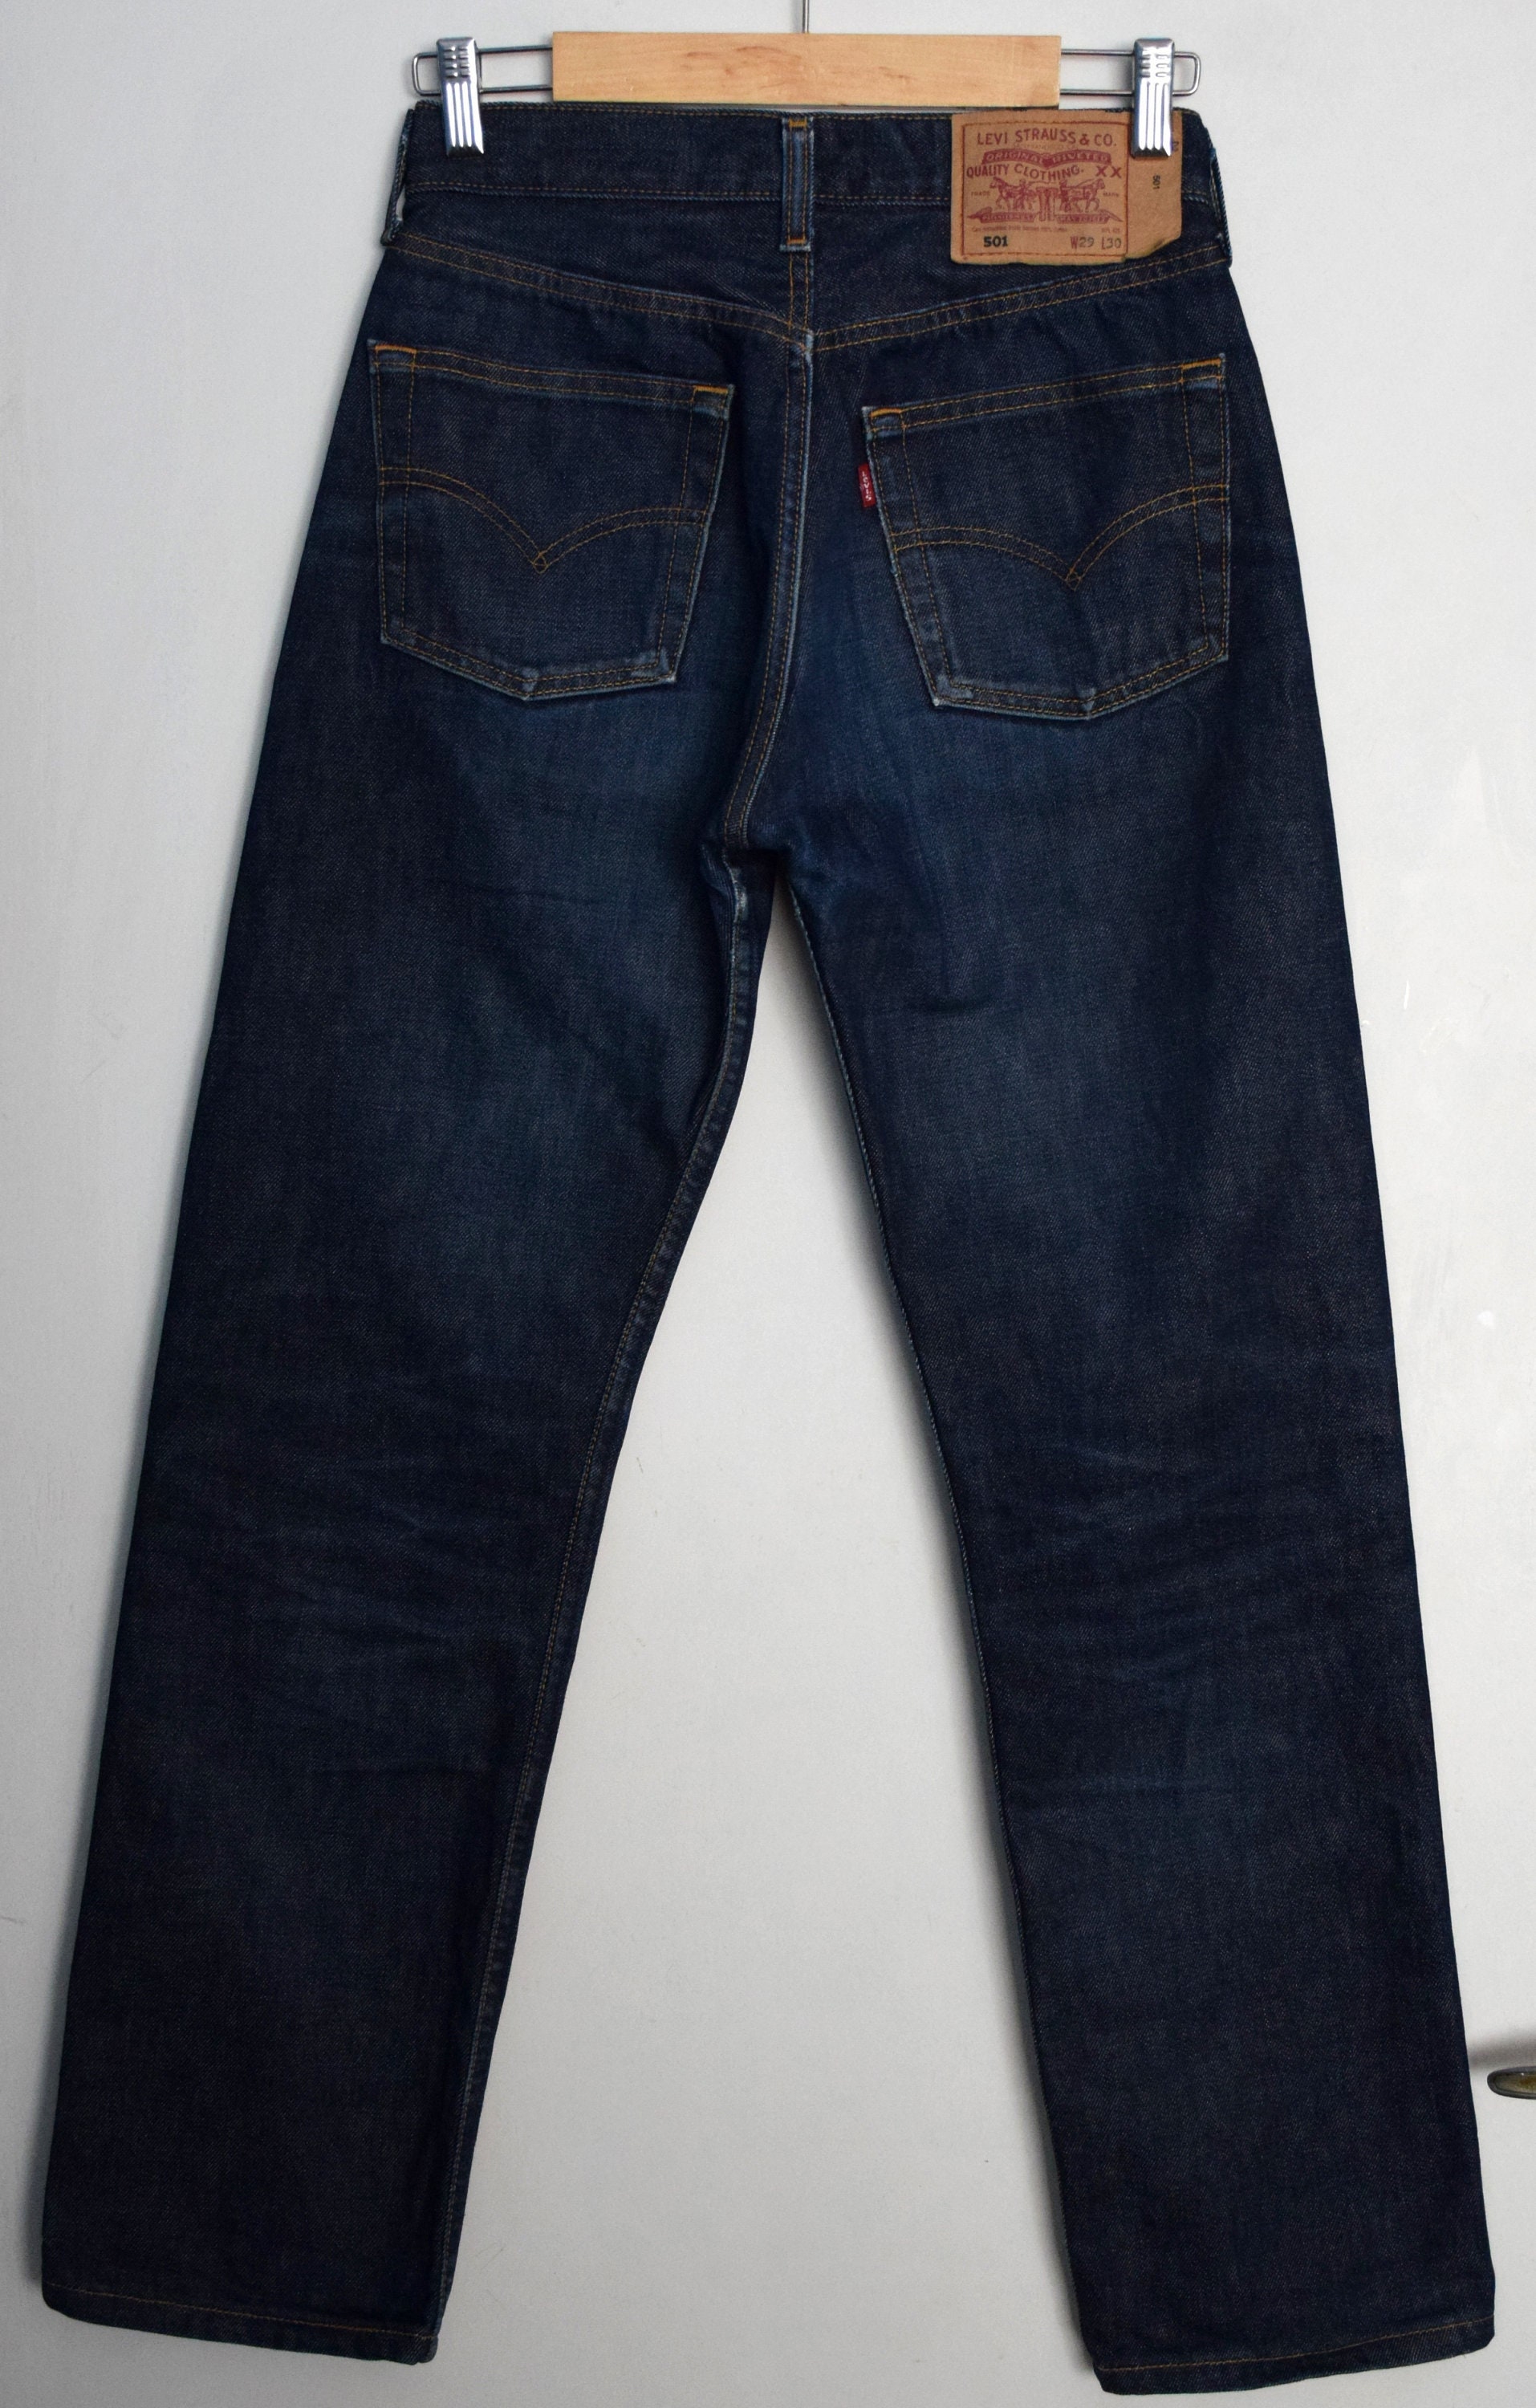 26 Inch Waist Jeans - Etsy